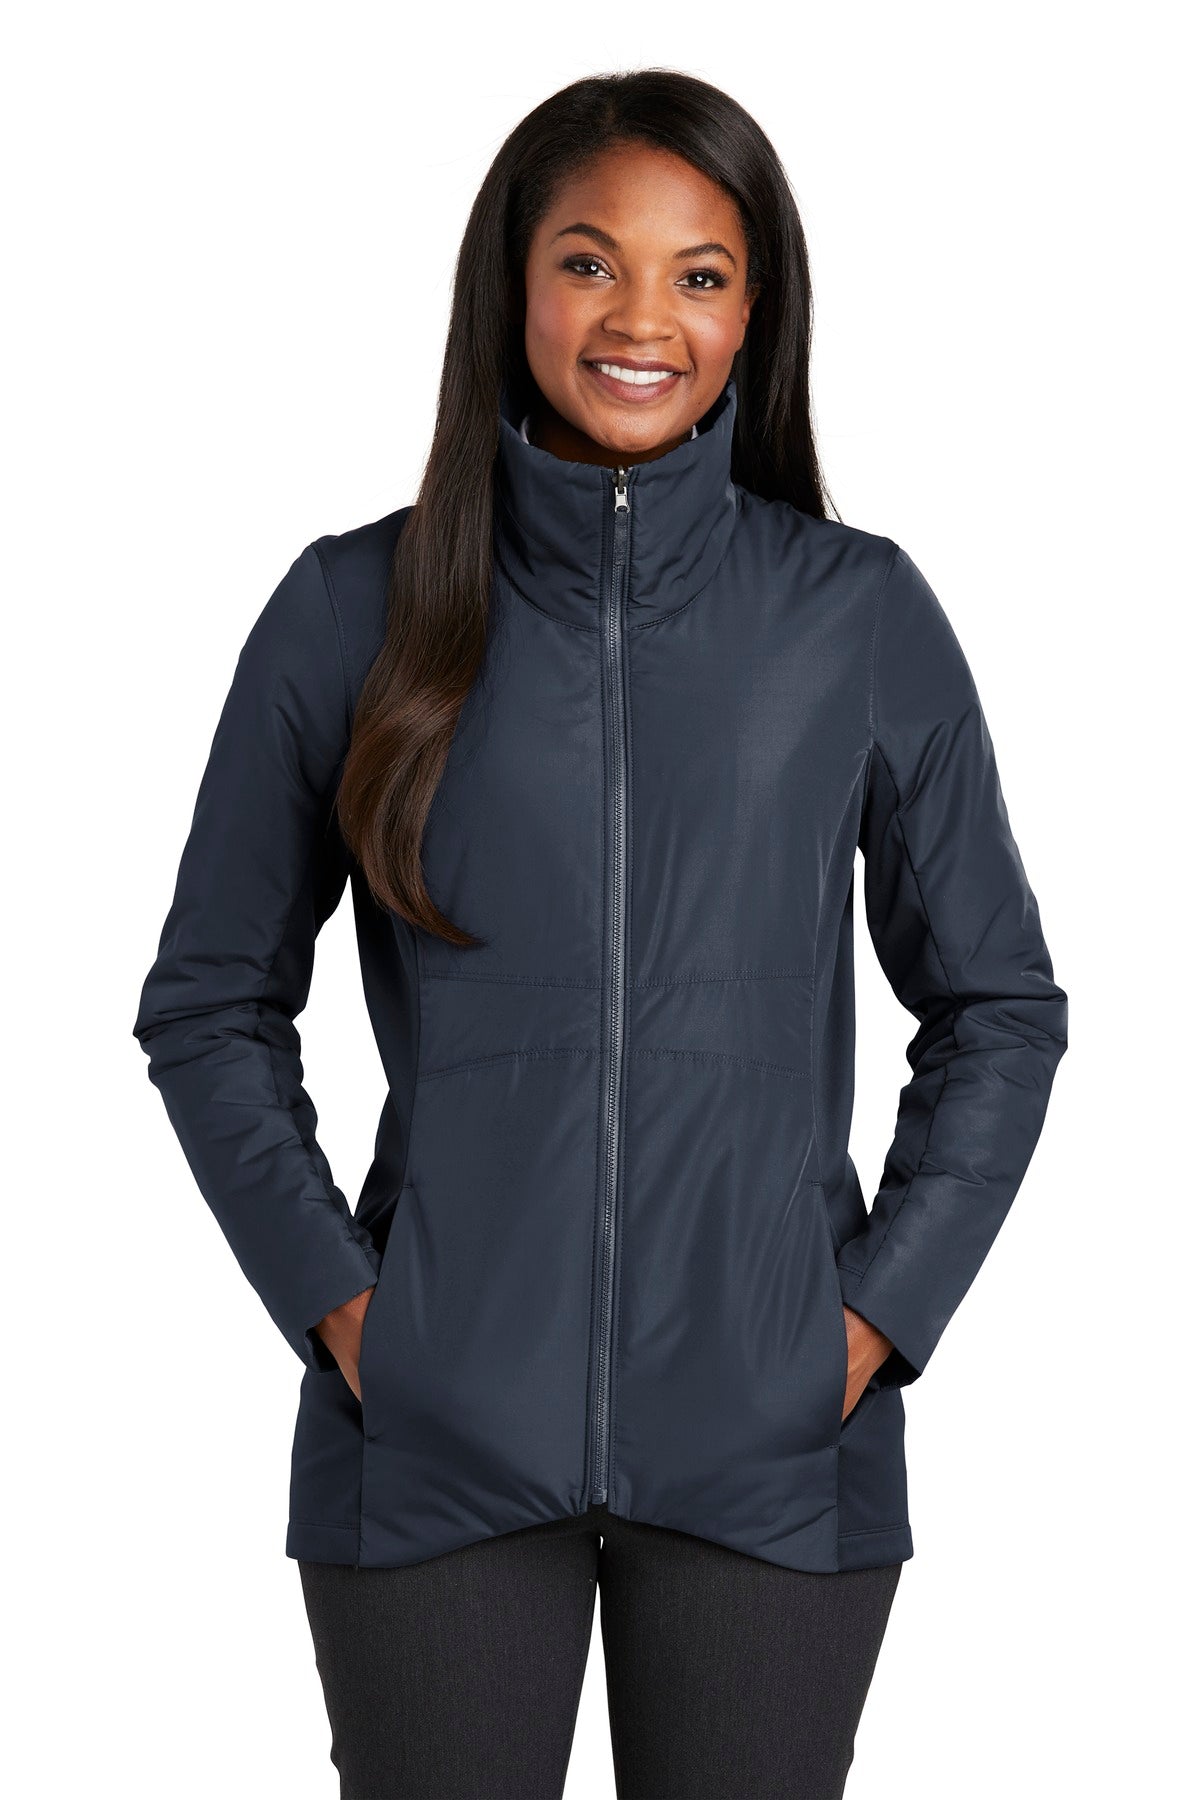 Port Authority ® Ladies Collective Insulated Jacket. L902 - DFW Impression